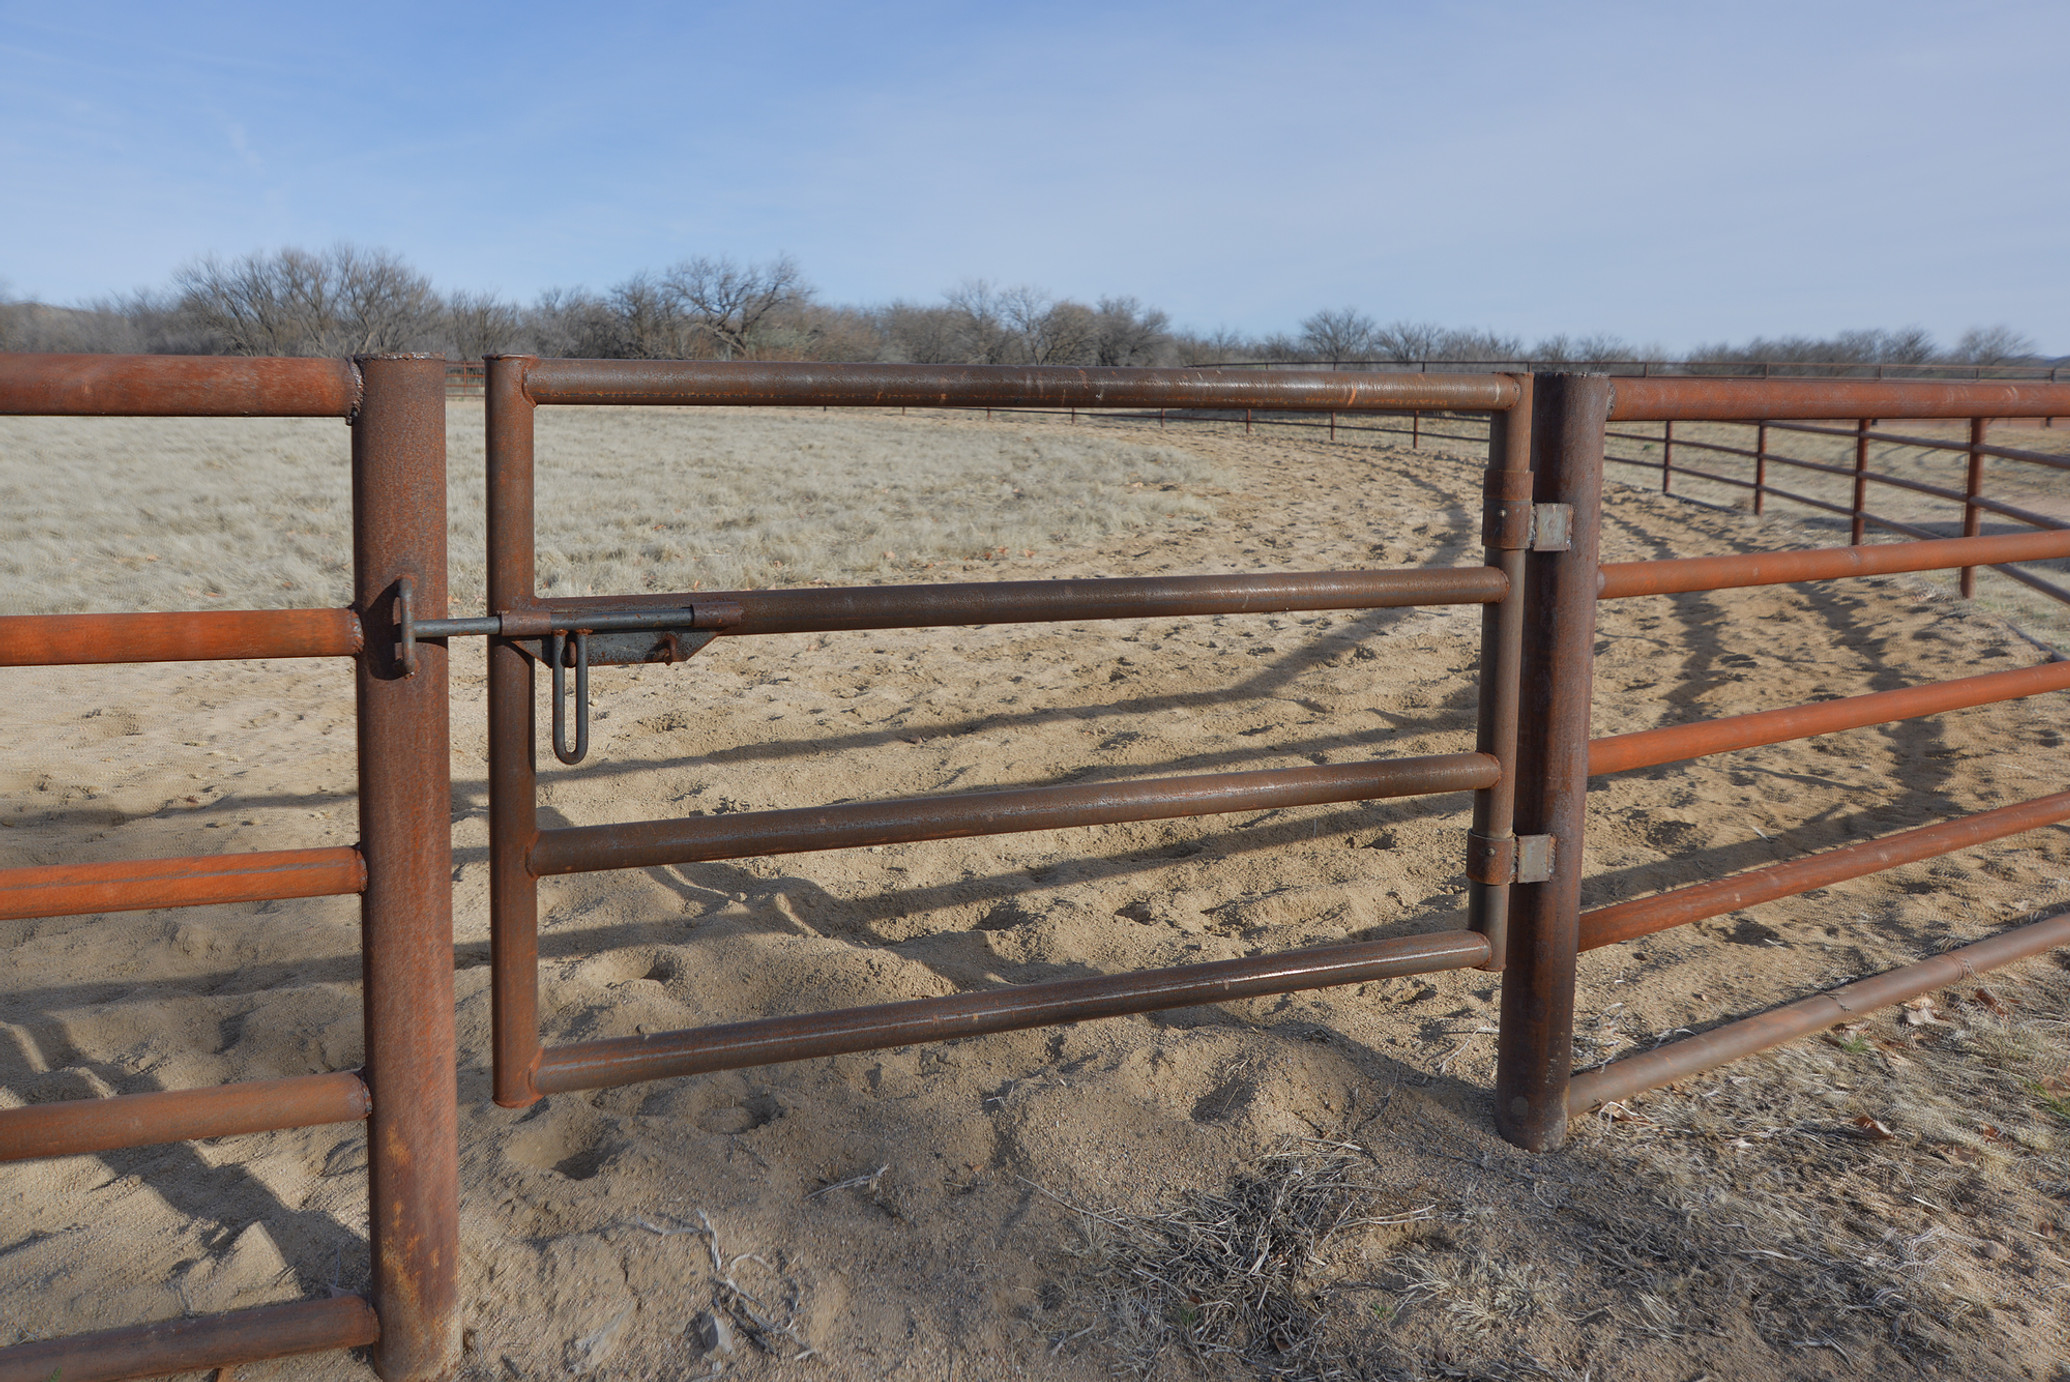 Pipe Fencing & Gate Project